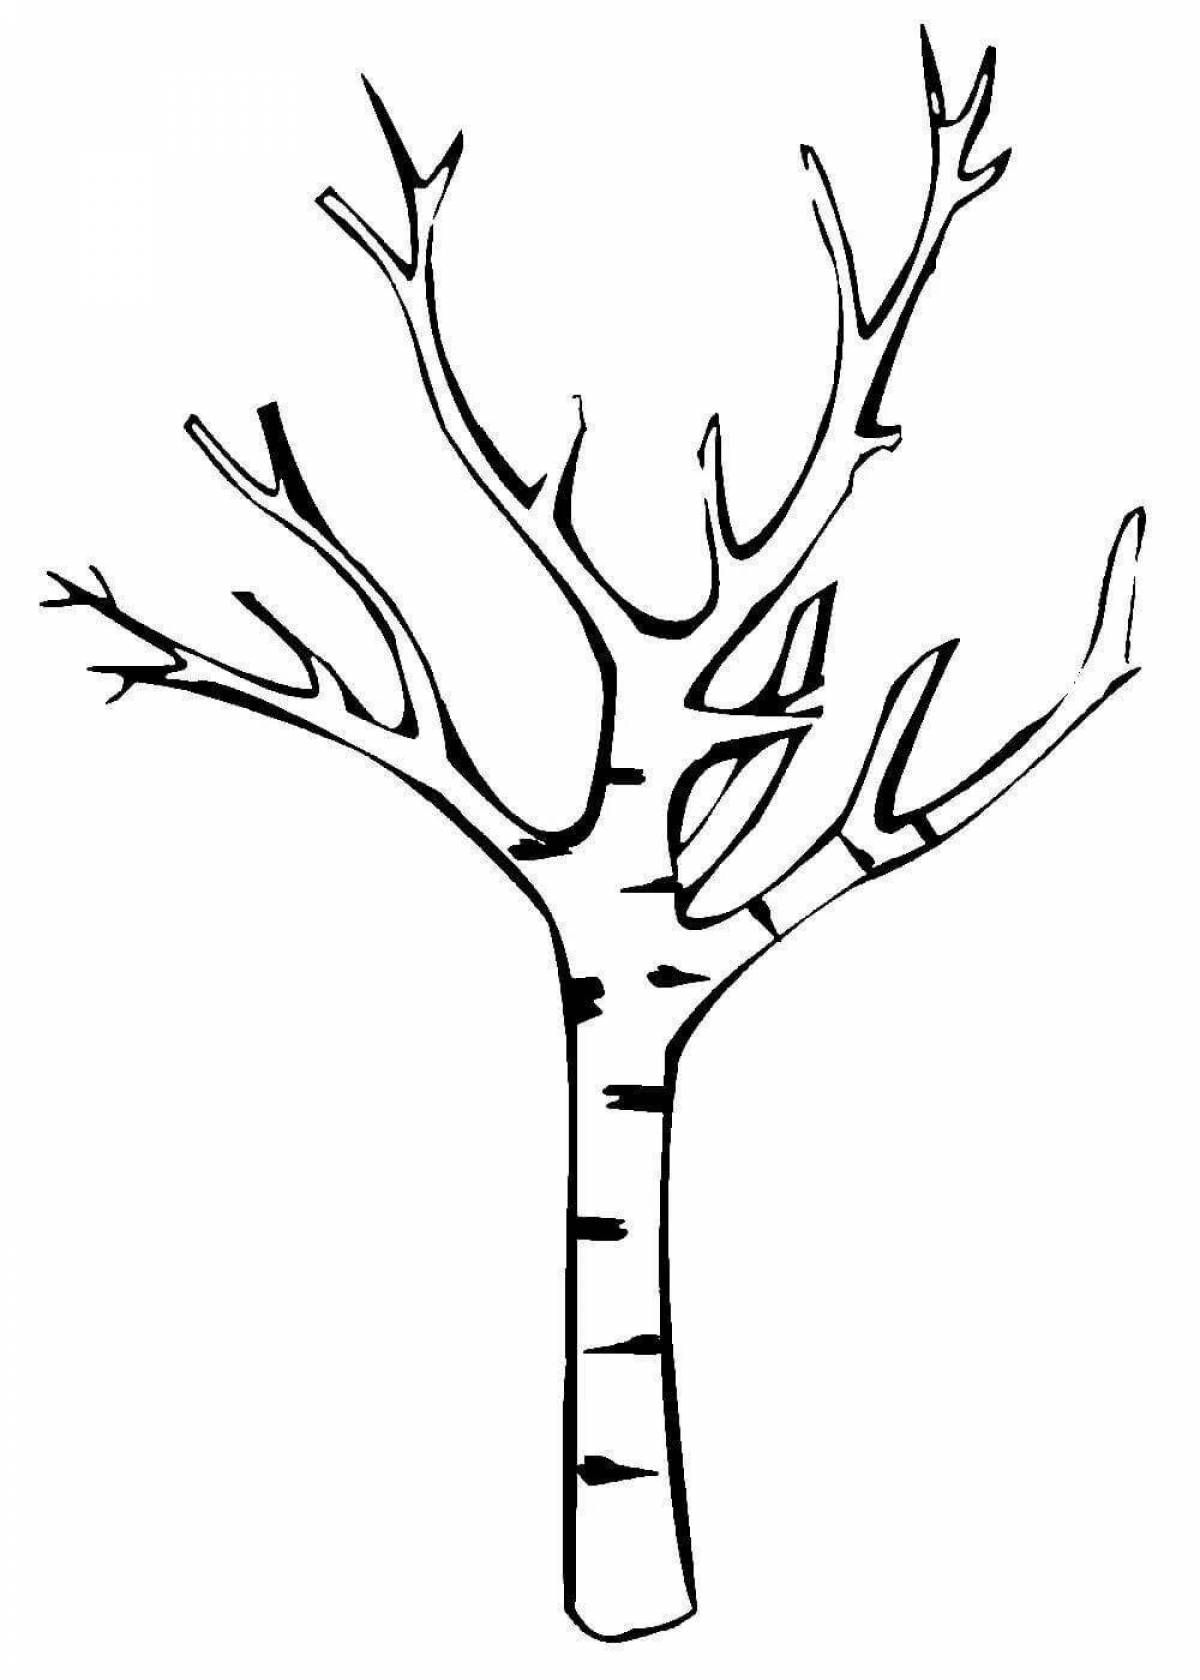 Fabulous tree trunk coloring page for kids